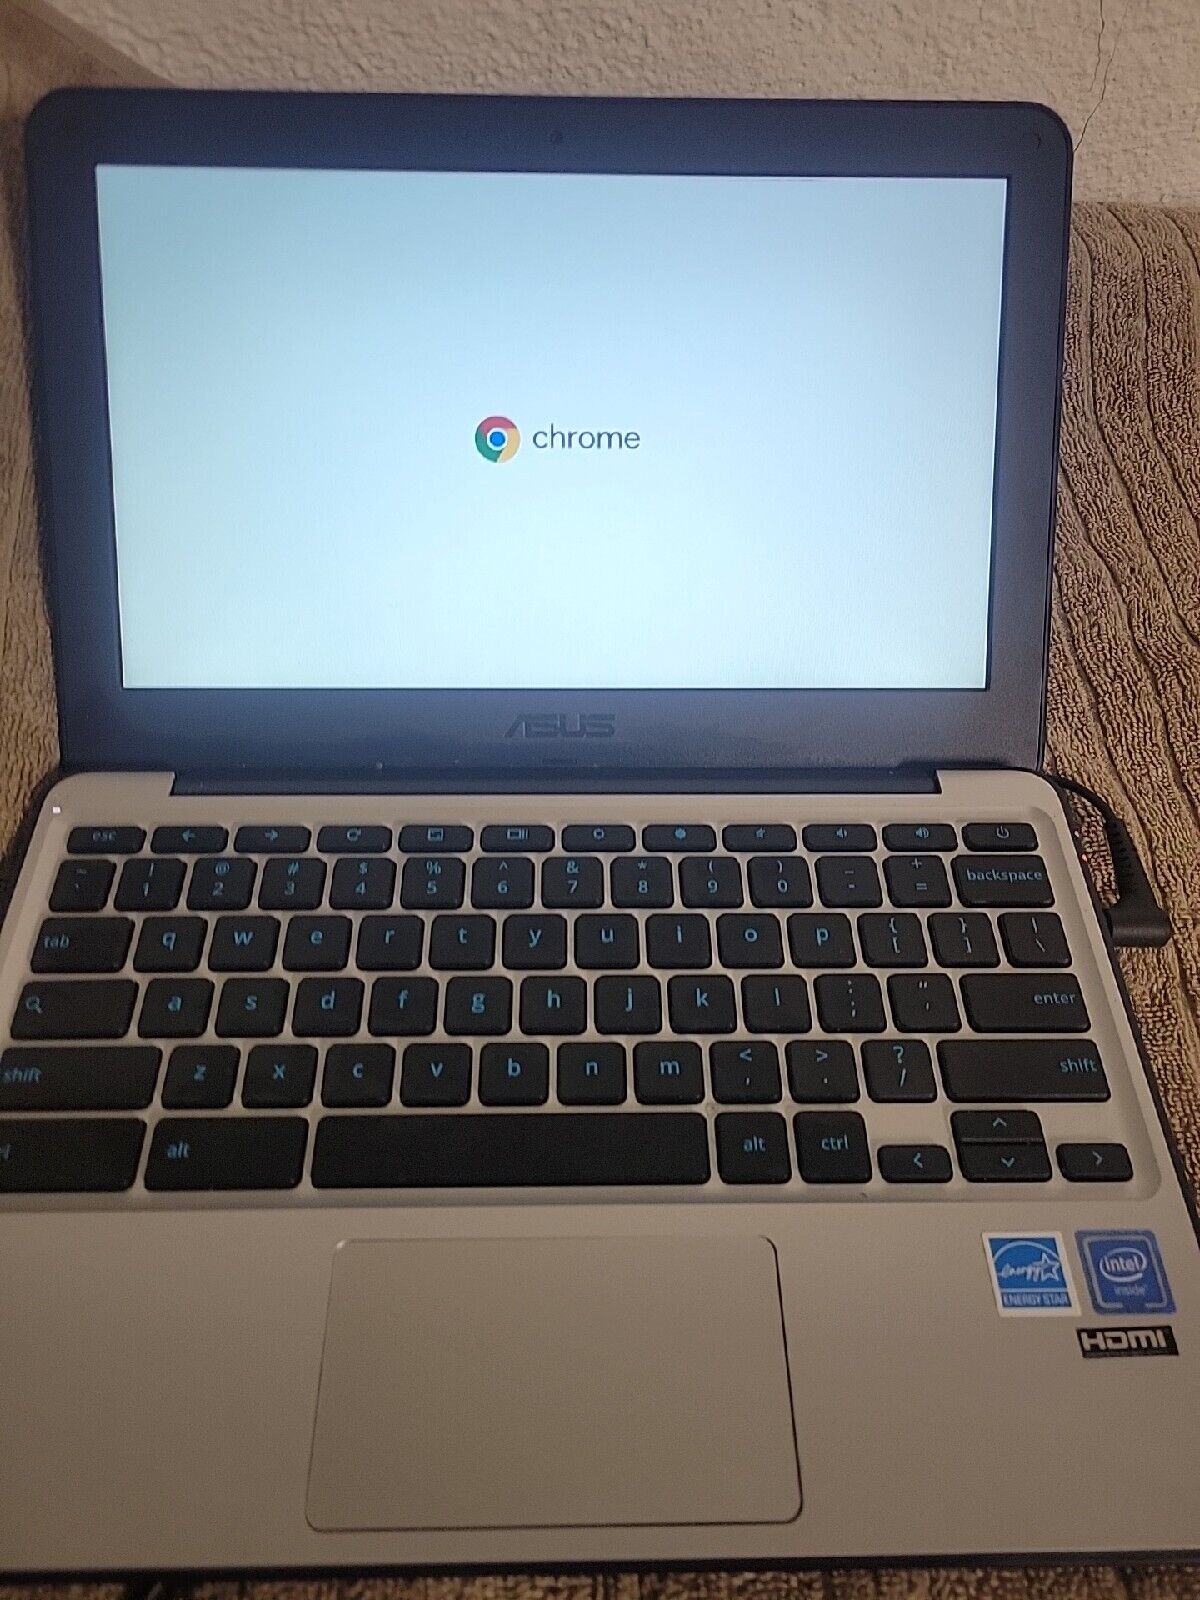 ASUS Chromebook C202S In Great Condition with Original Power Cord Lightly Used